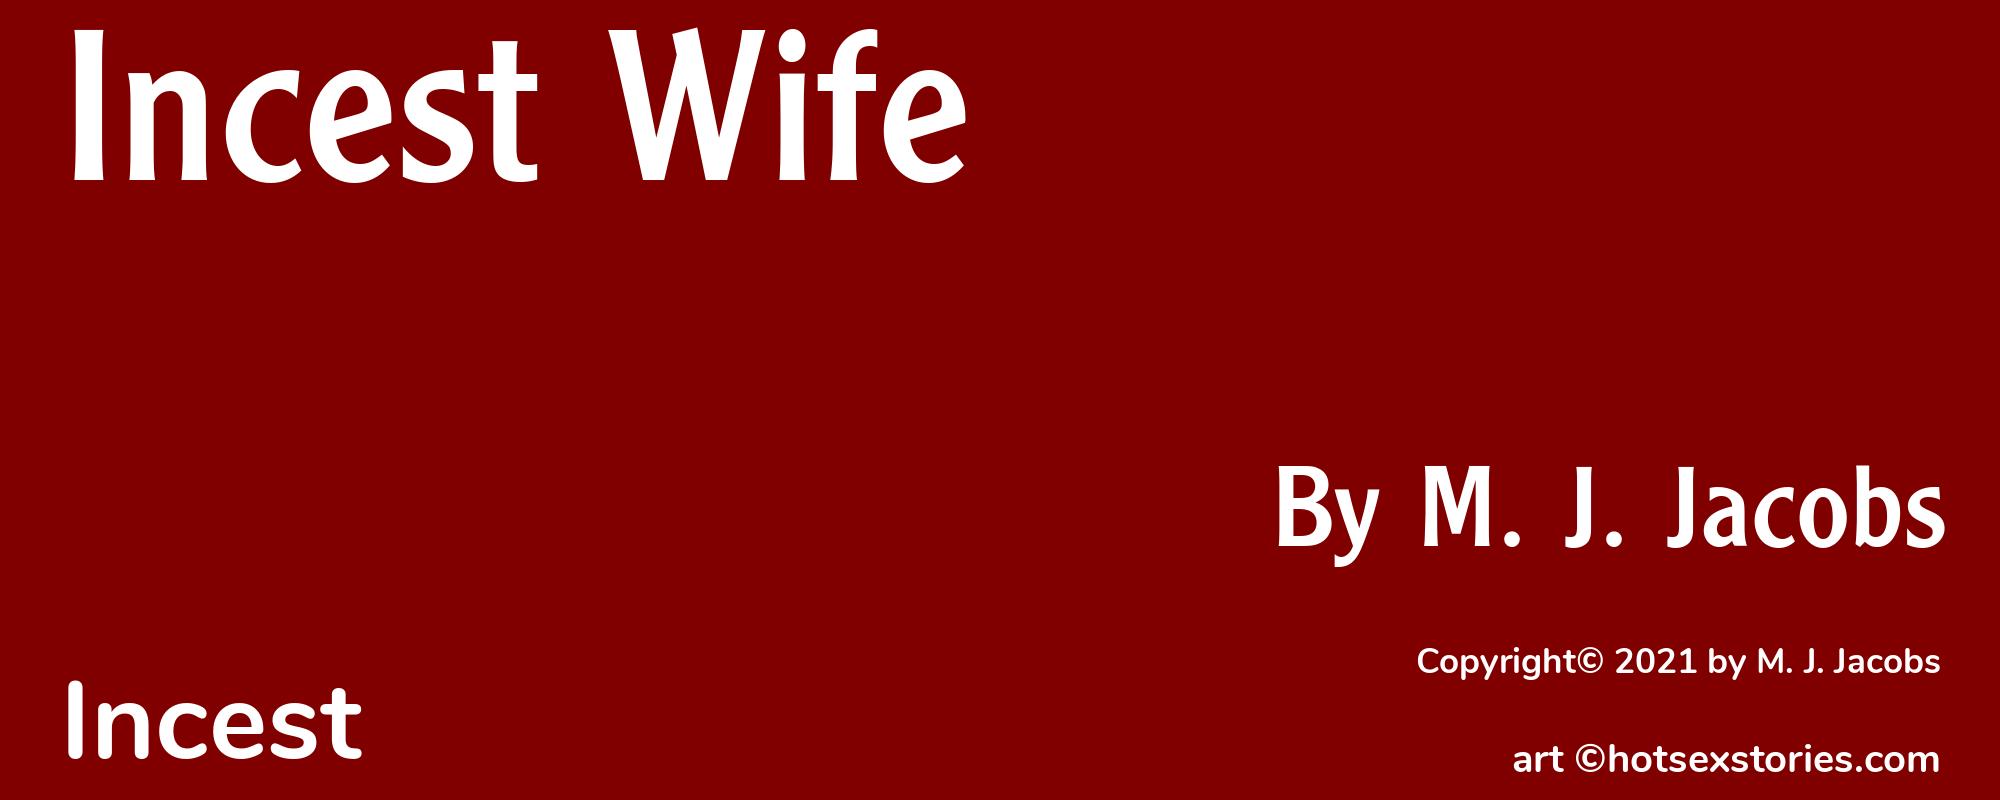 Incest Wife - Cover